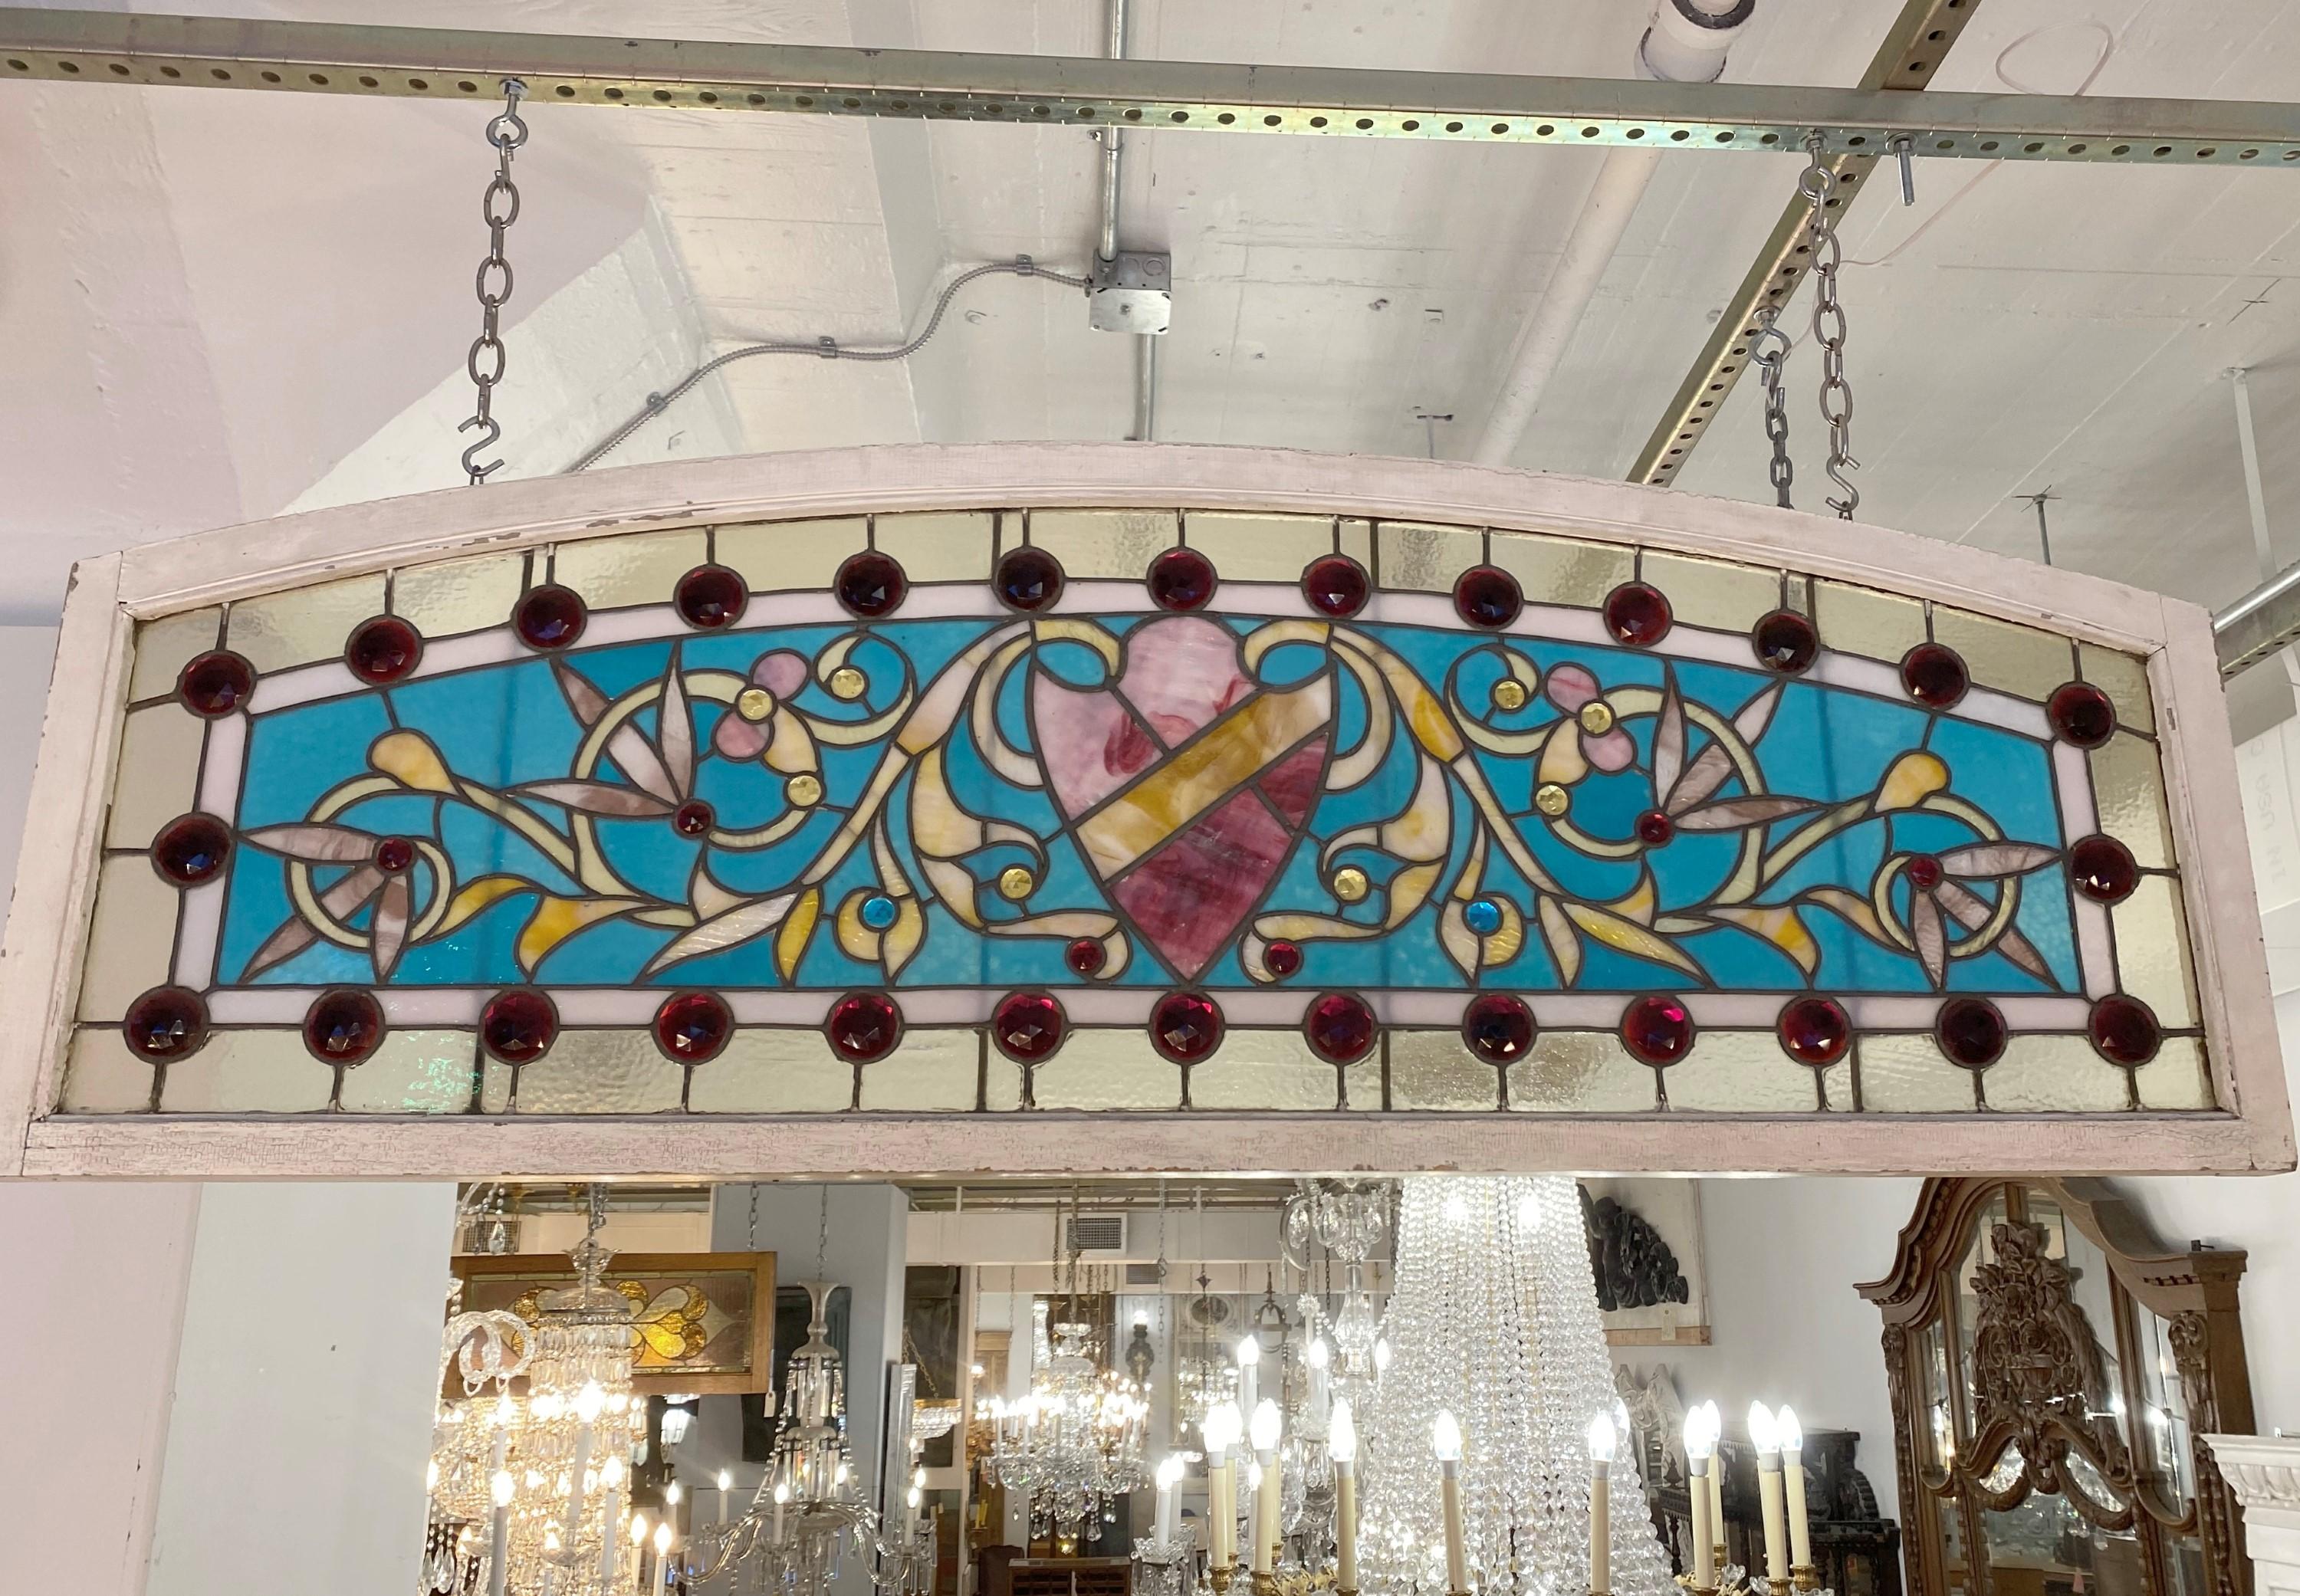 Early 1900s arched stained glass transom window. The wide width and highly ornate design shows this was part of an over the top entranceway. The large center shield is flanked by smaller jewels in vivid red, yellow and blue colors. Please note, this